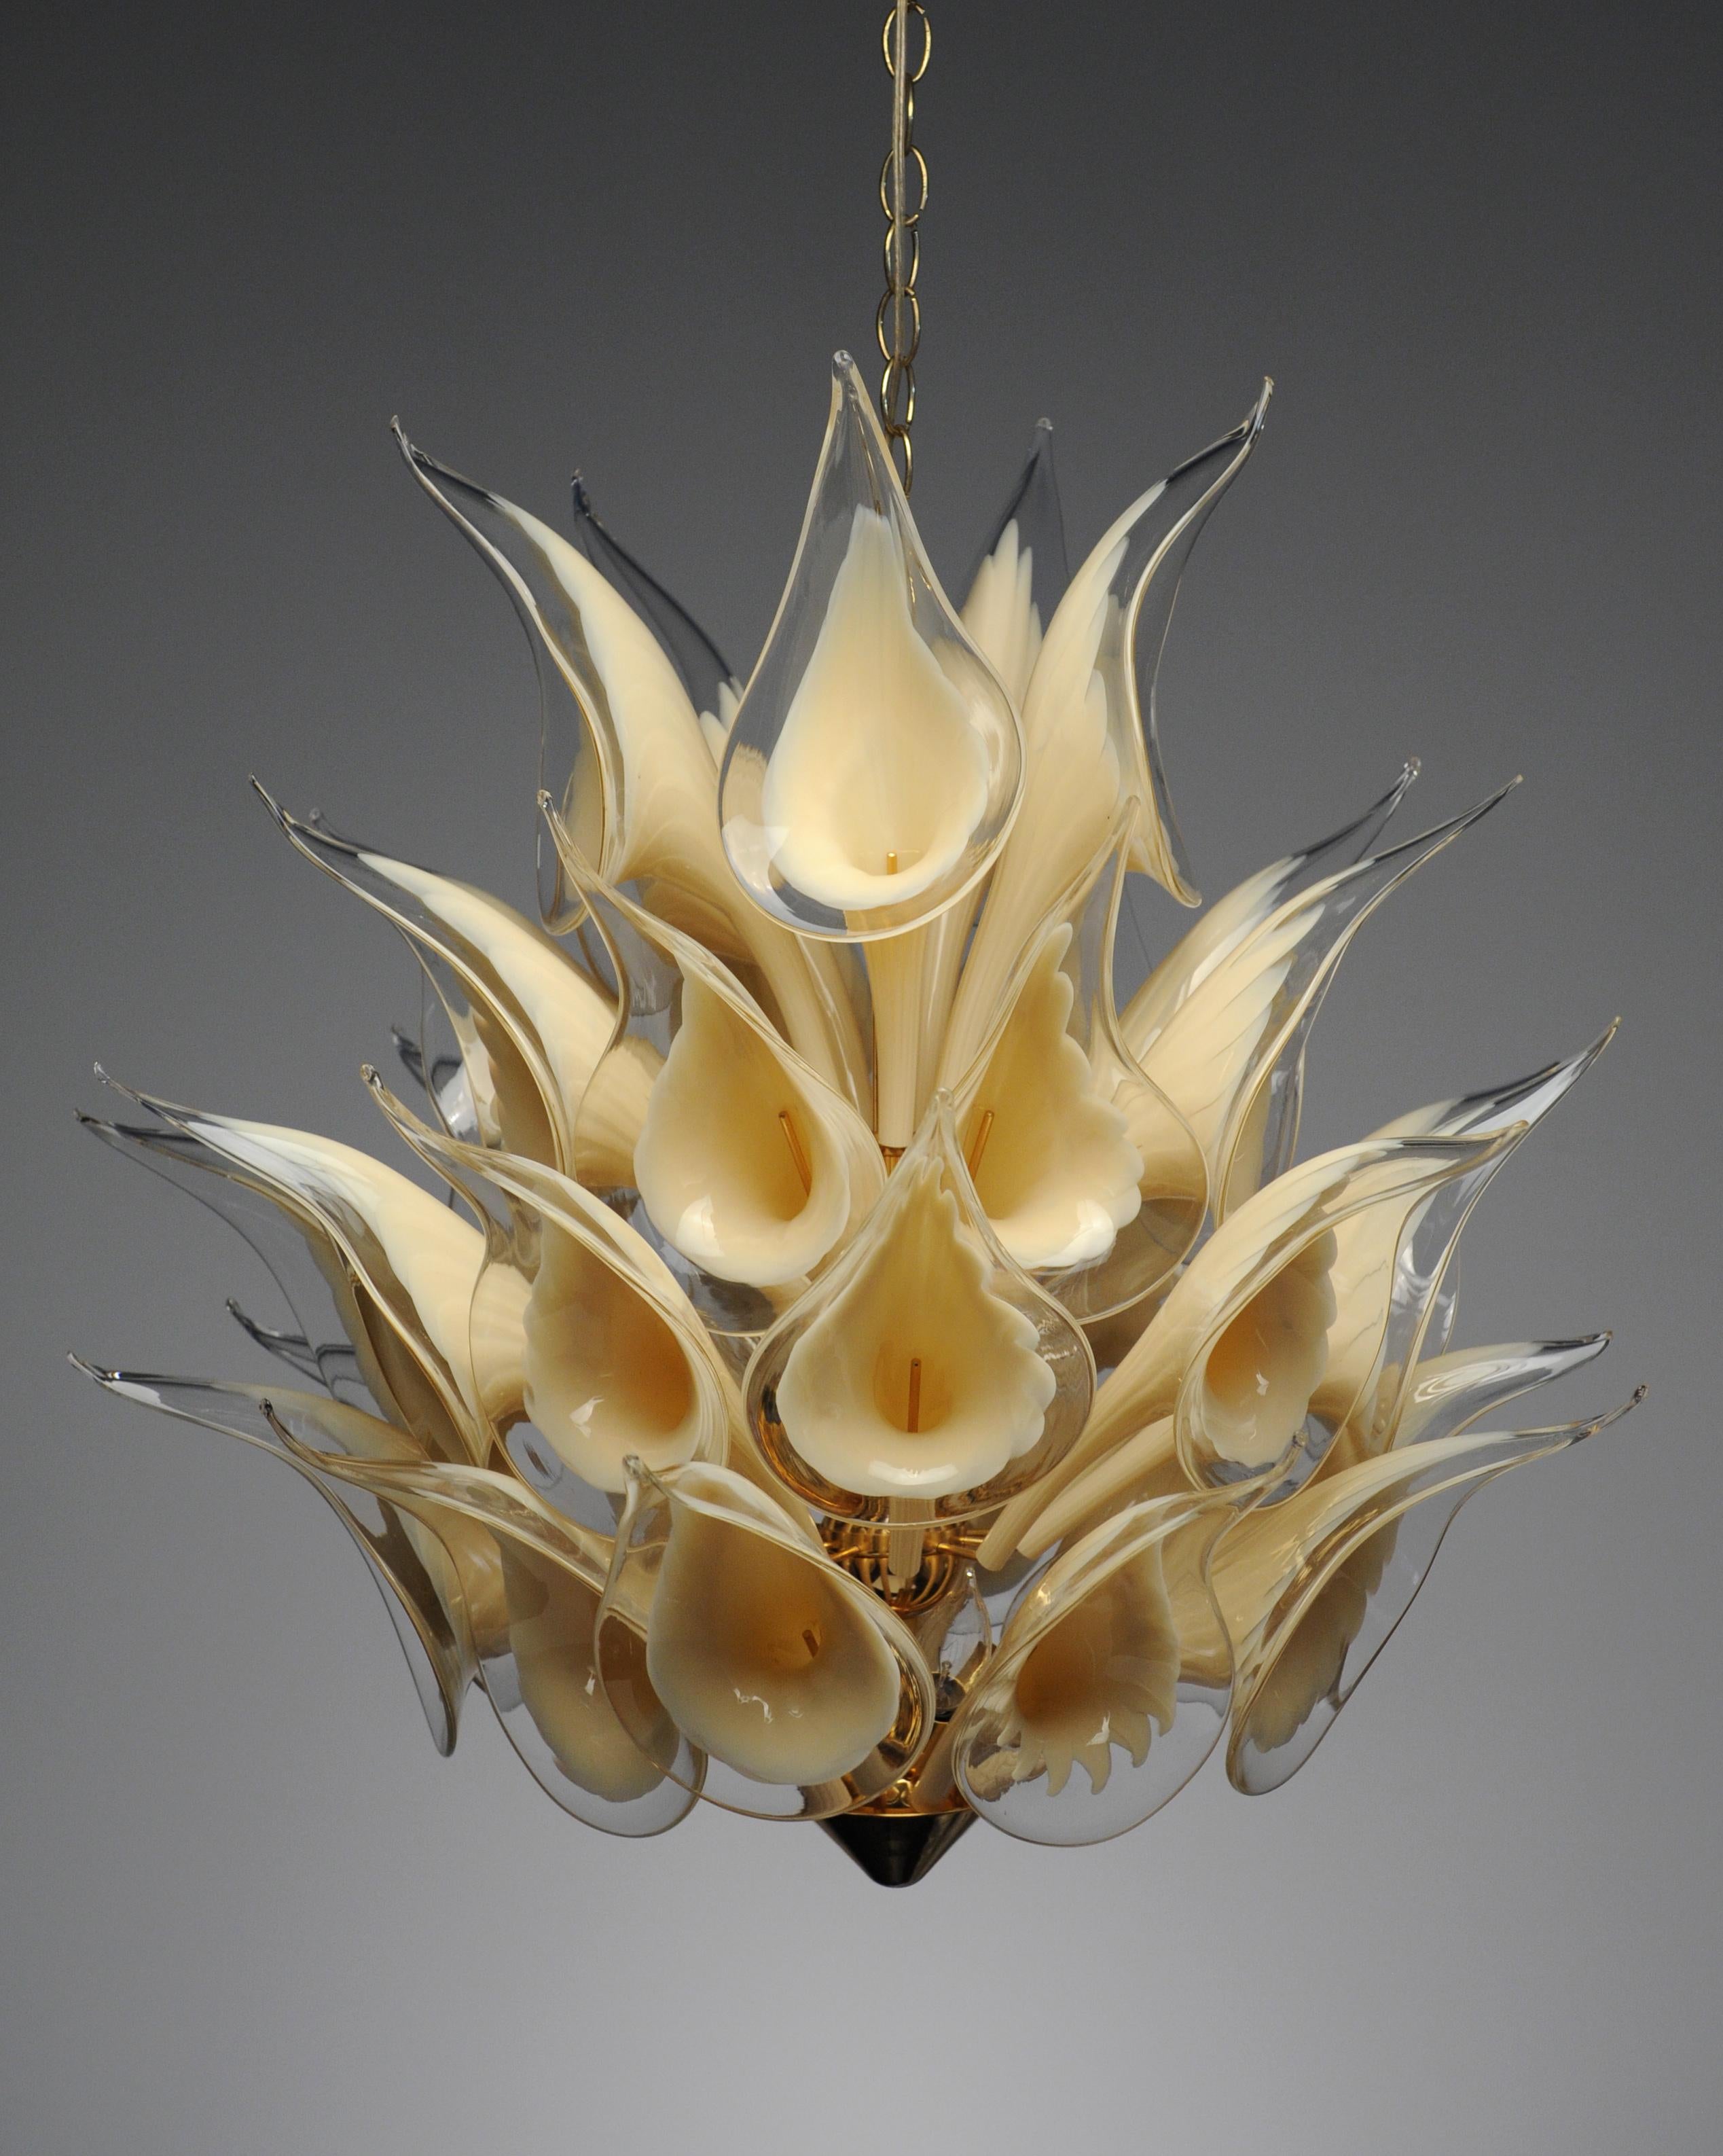 Fantastic and dramatic vintage glass Murano chandelier. There are 32 hand blown glass 